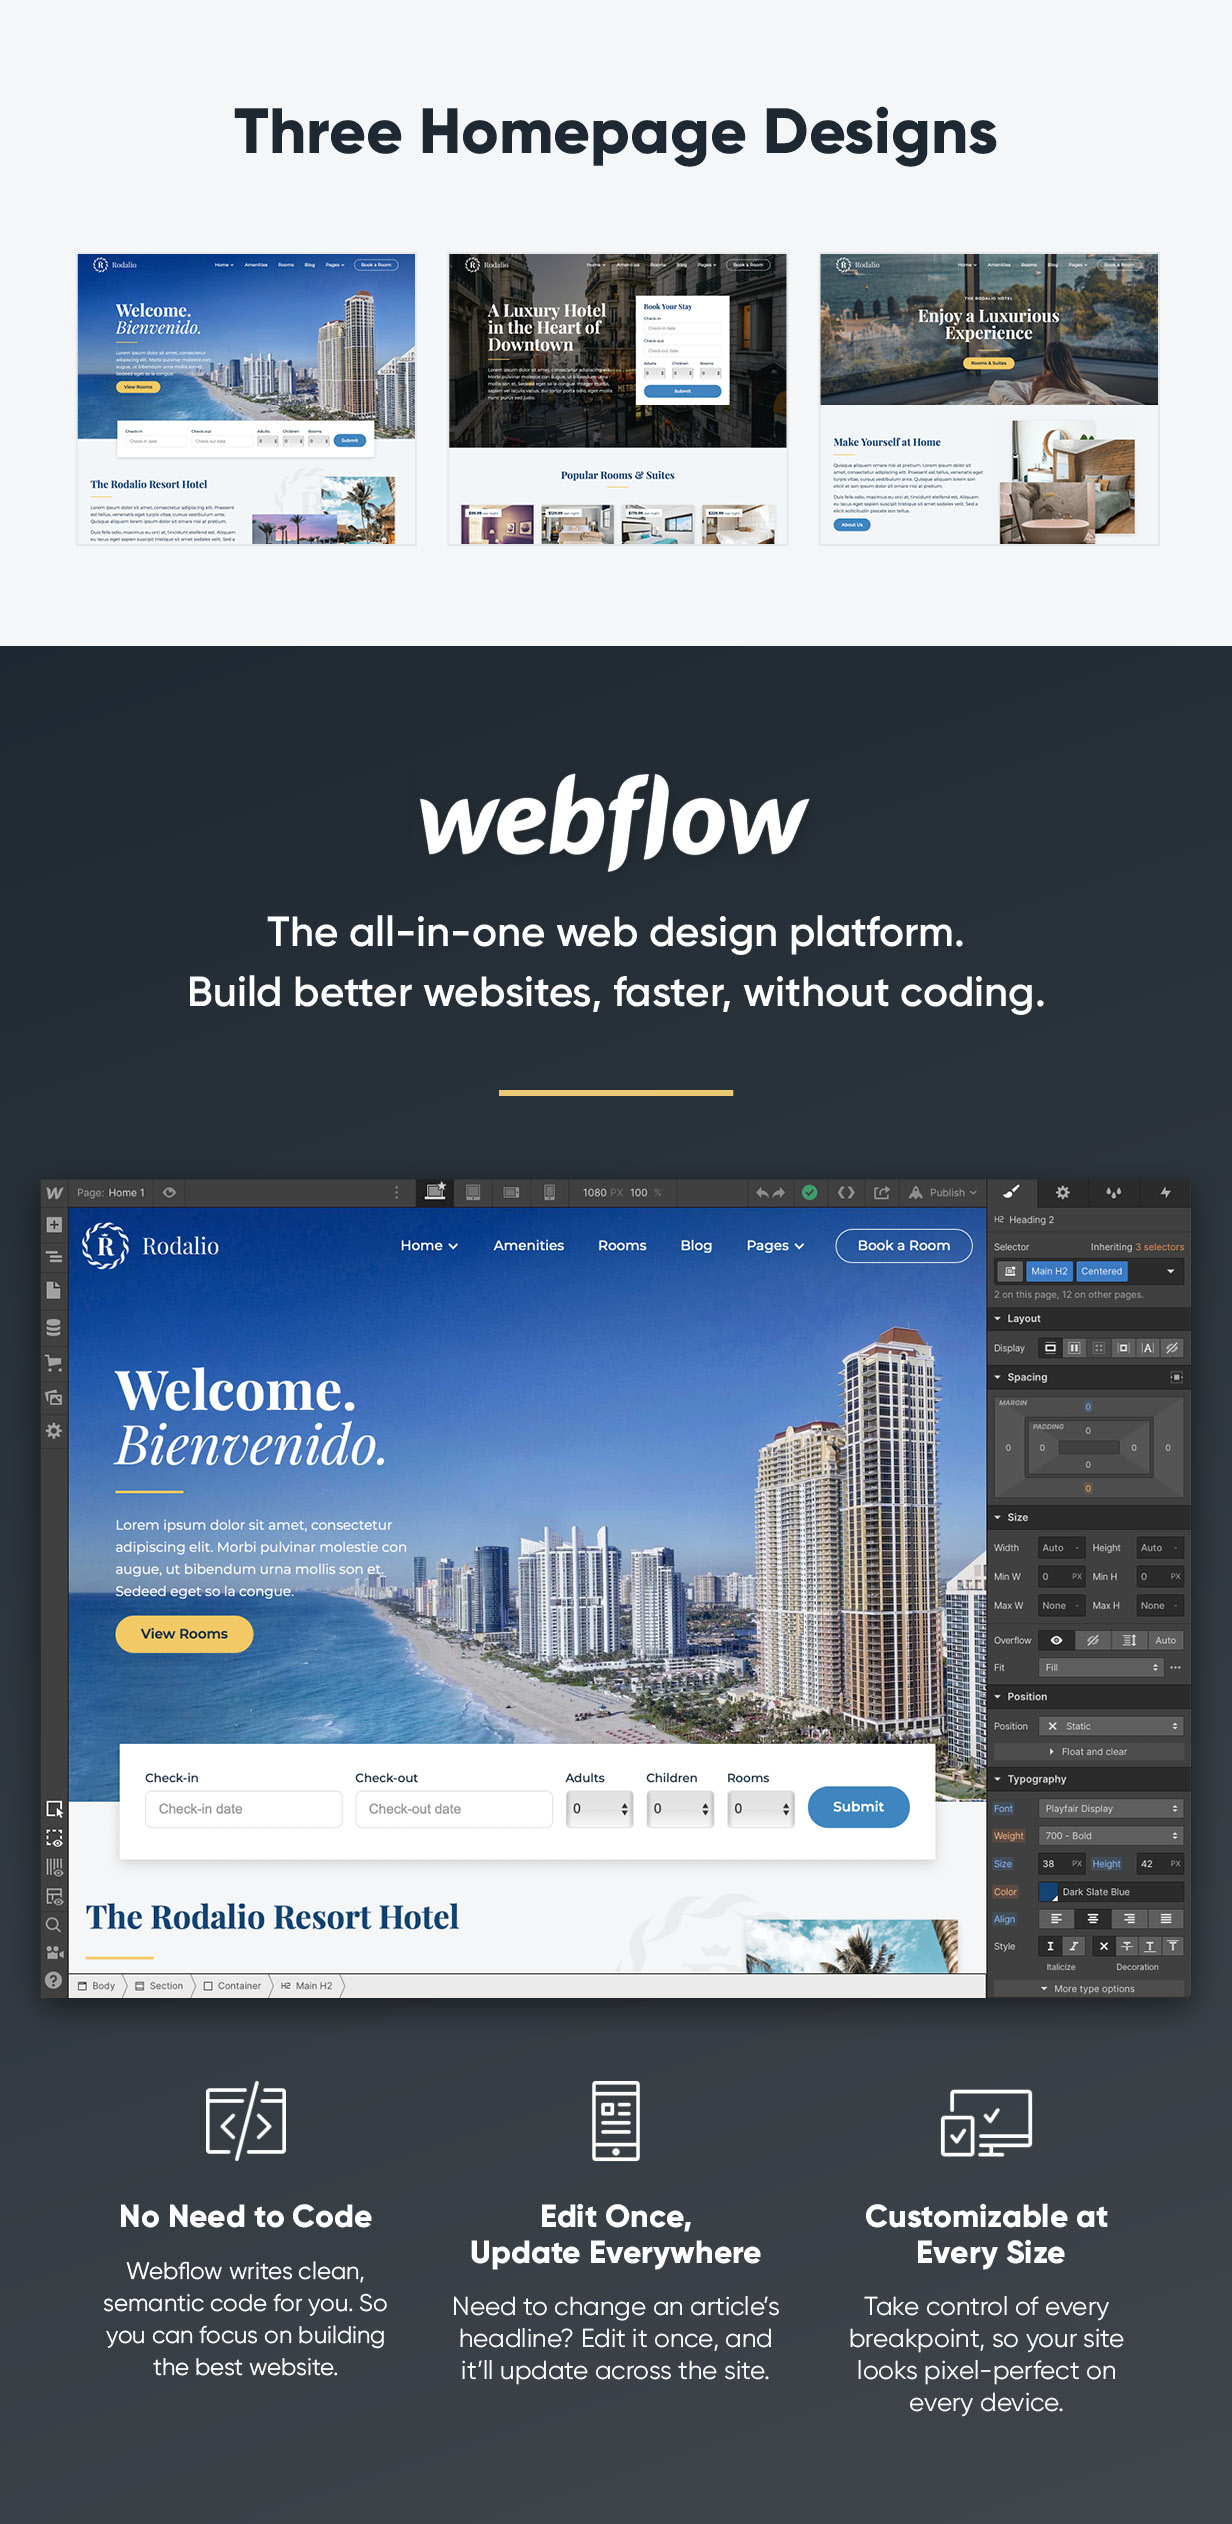 Three Homepage designs. Webflow is the all-in-one web design platform. Build better websites without code.